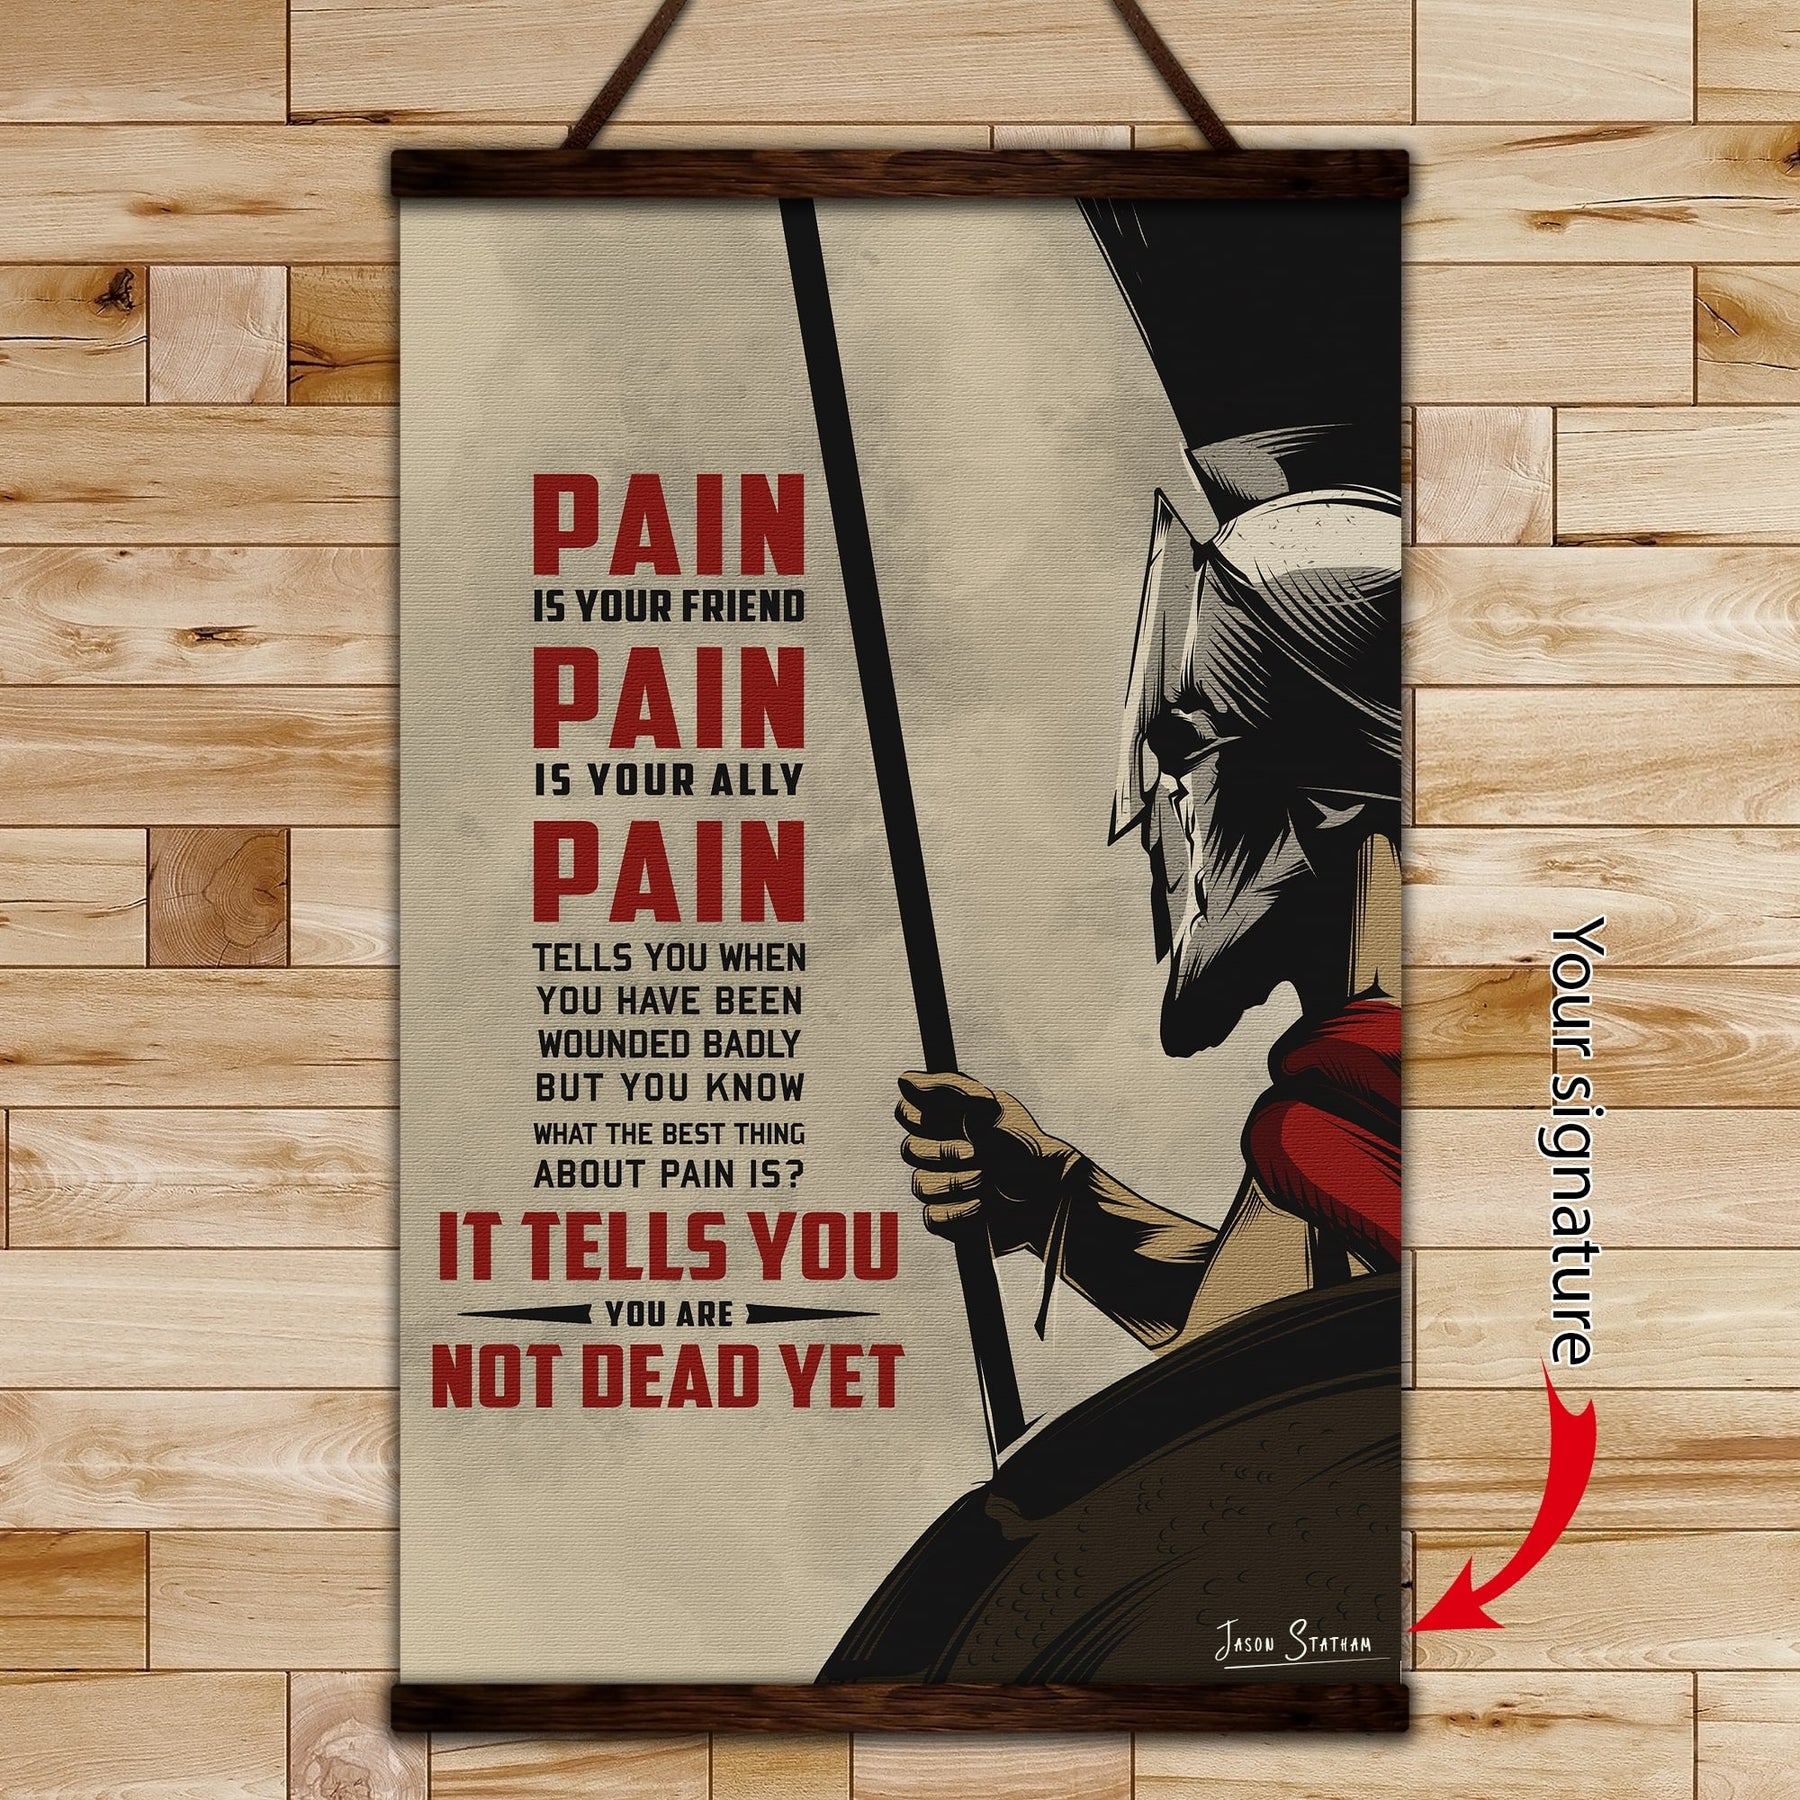 WA011 - PAIN - It Tells You - You Are Not Dead Yet - Spartan - Vertical Poster - Vertical Canvas - Warrior Poster